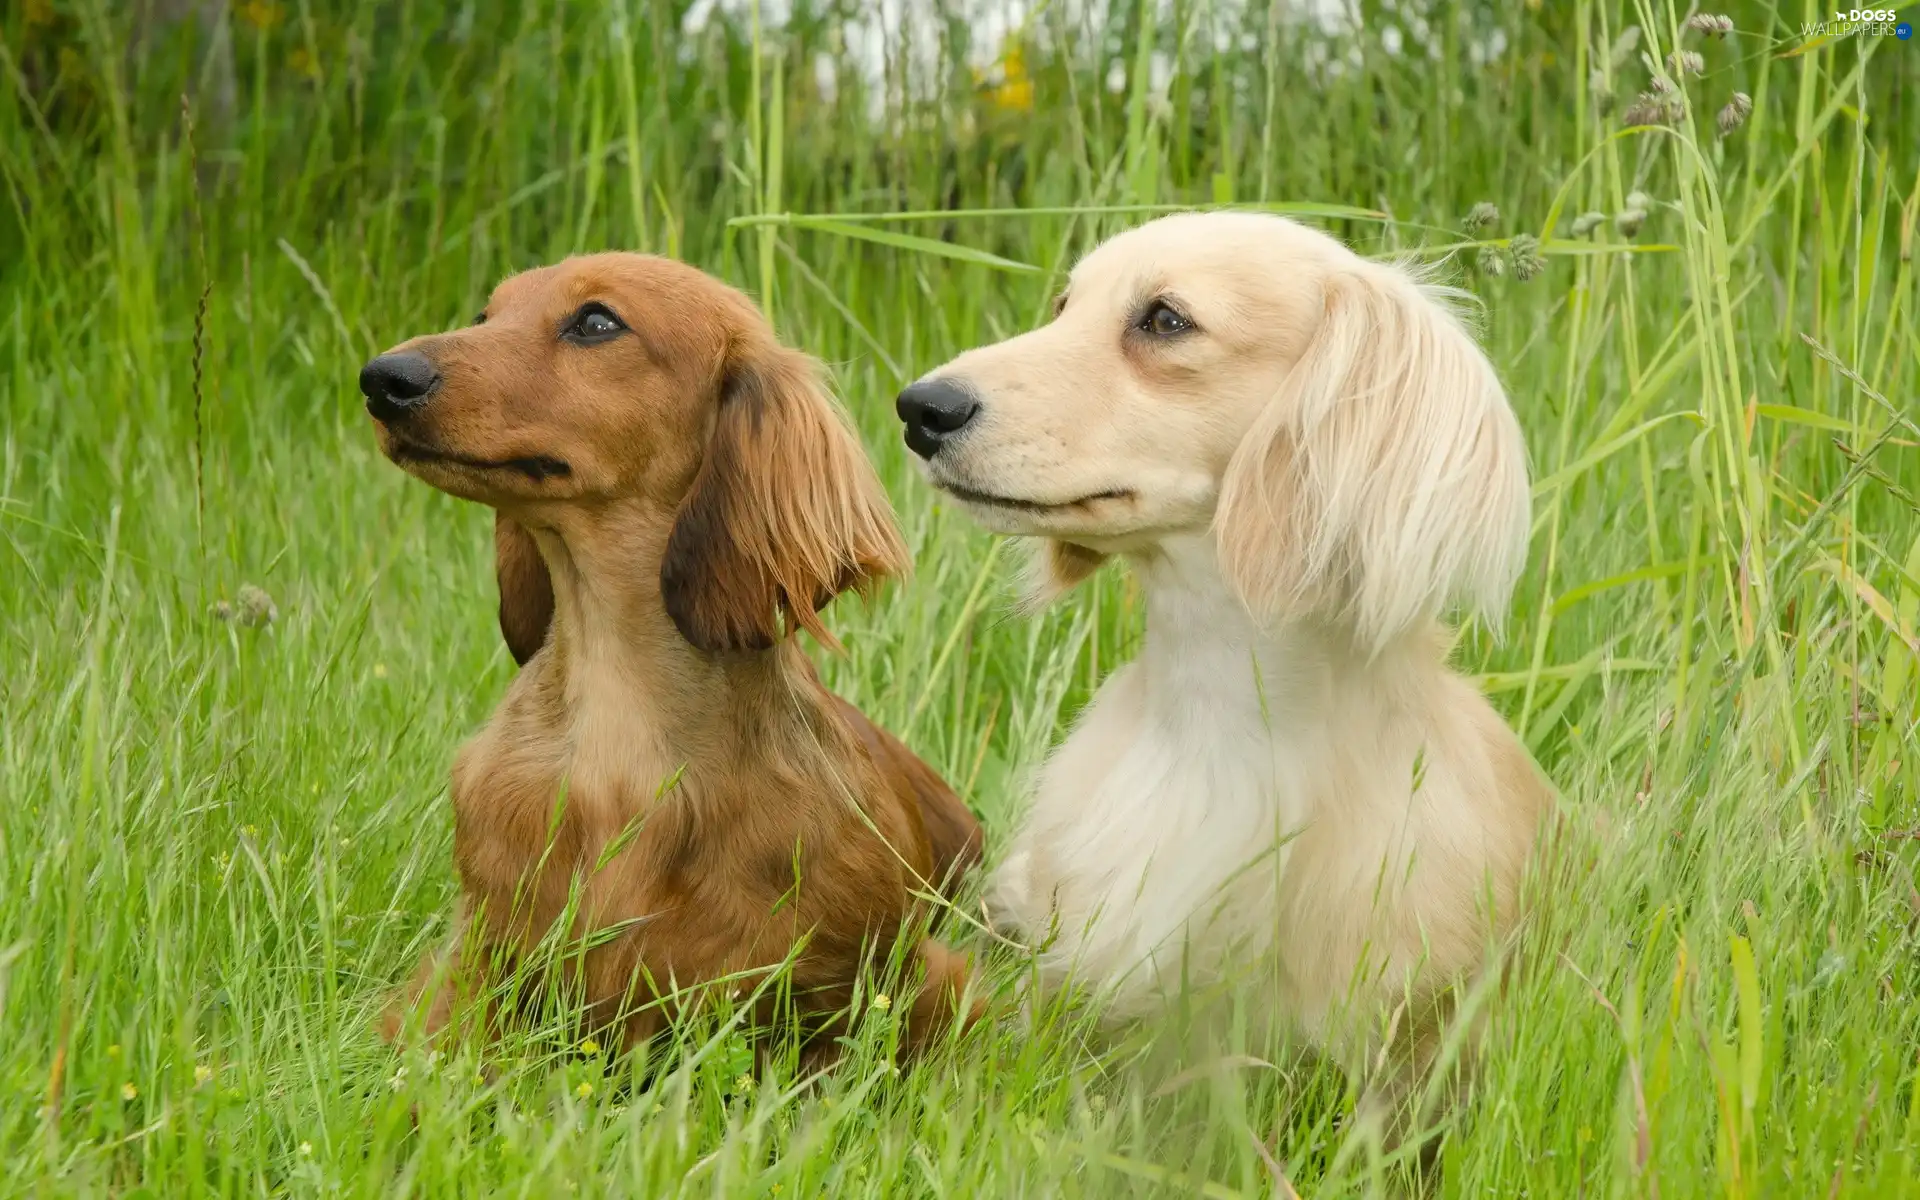 dachshunds, grass, Two cars